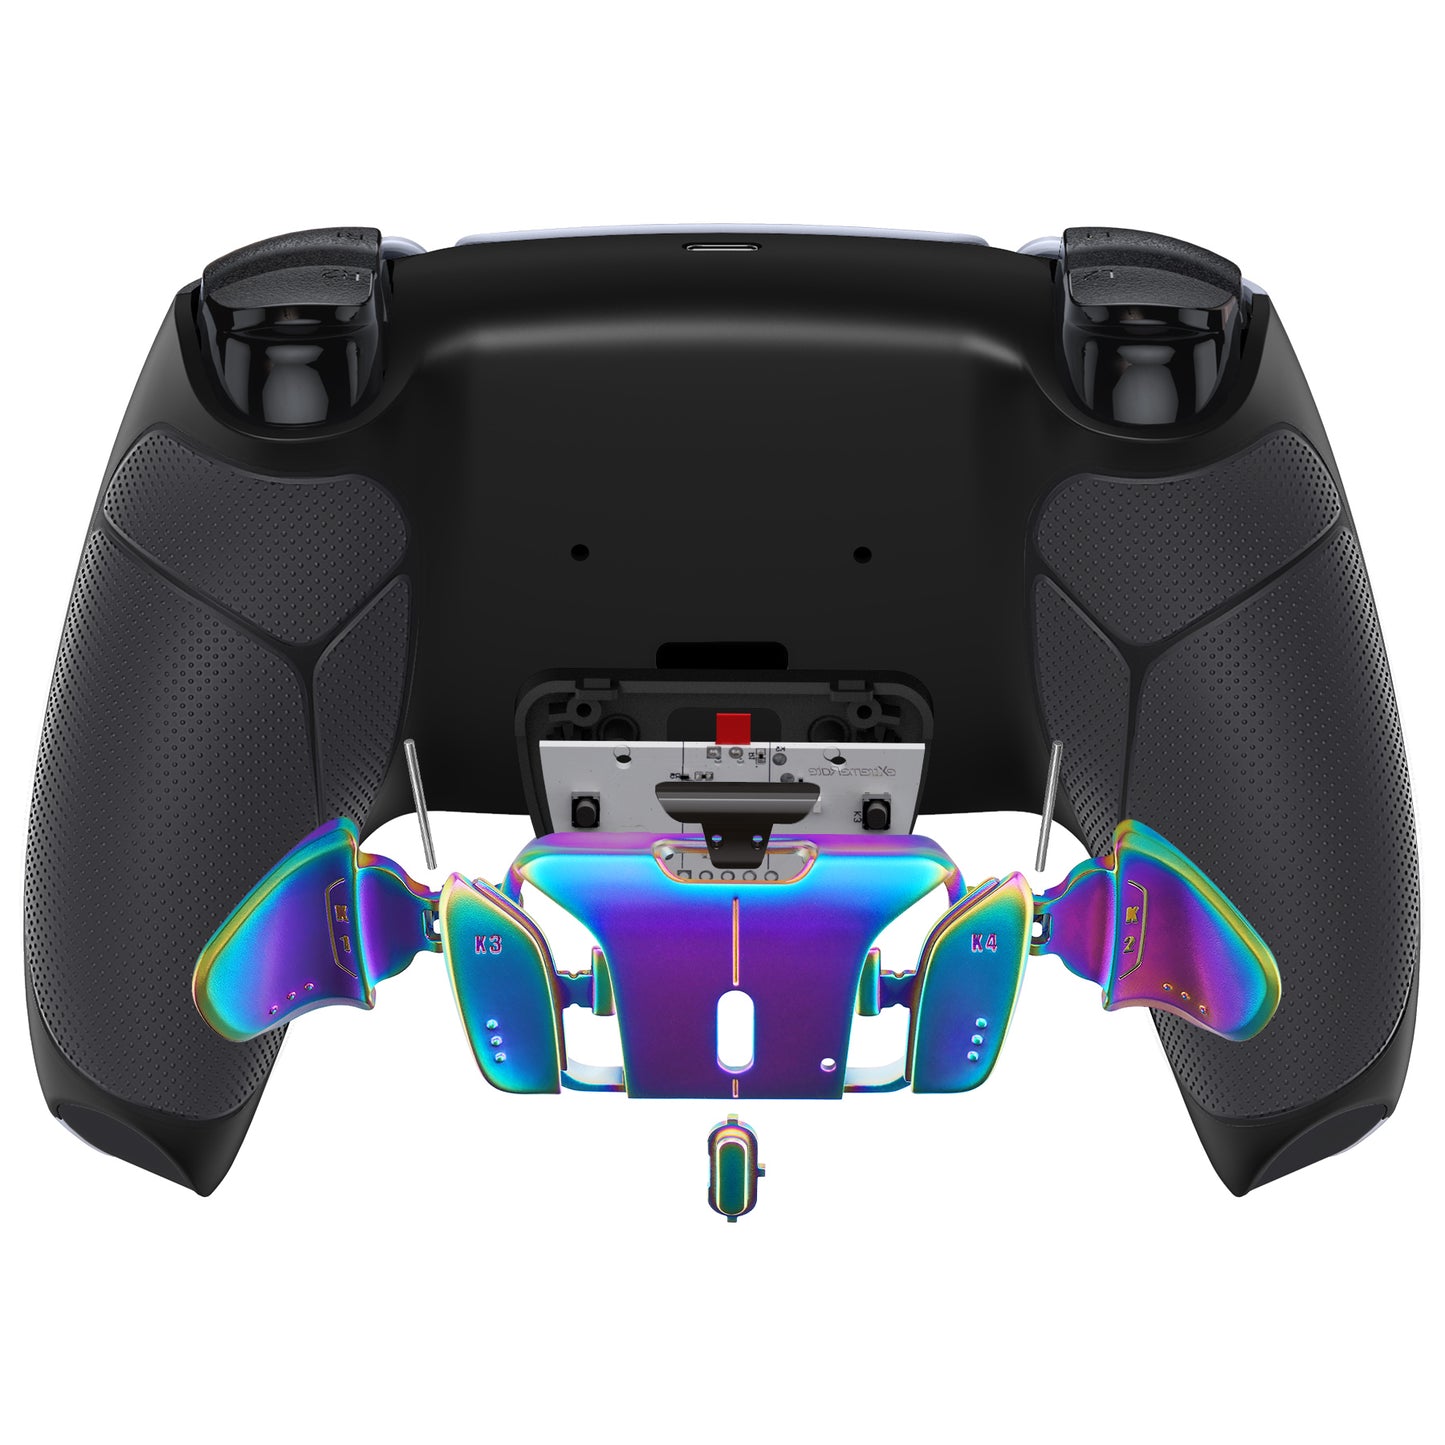 eXtremeRate Rainbow Aura Blue & Purple Real Metal Buttons (RMB) Version RISE 4.0 Remap Kit for PS5 Controller BDM-030/040 - Rubberized Black eXtremeRate